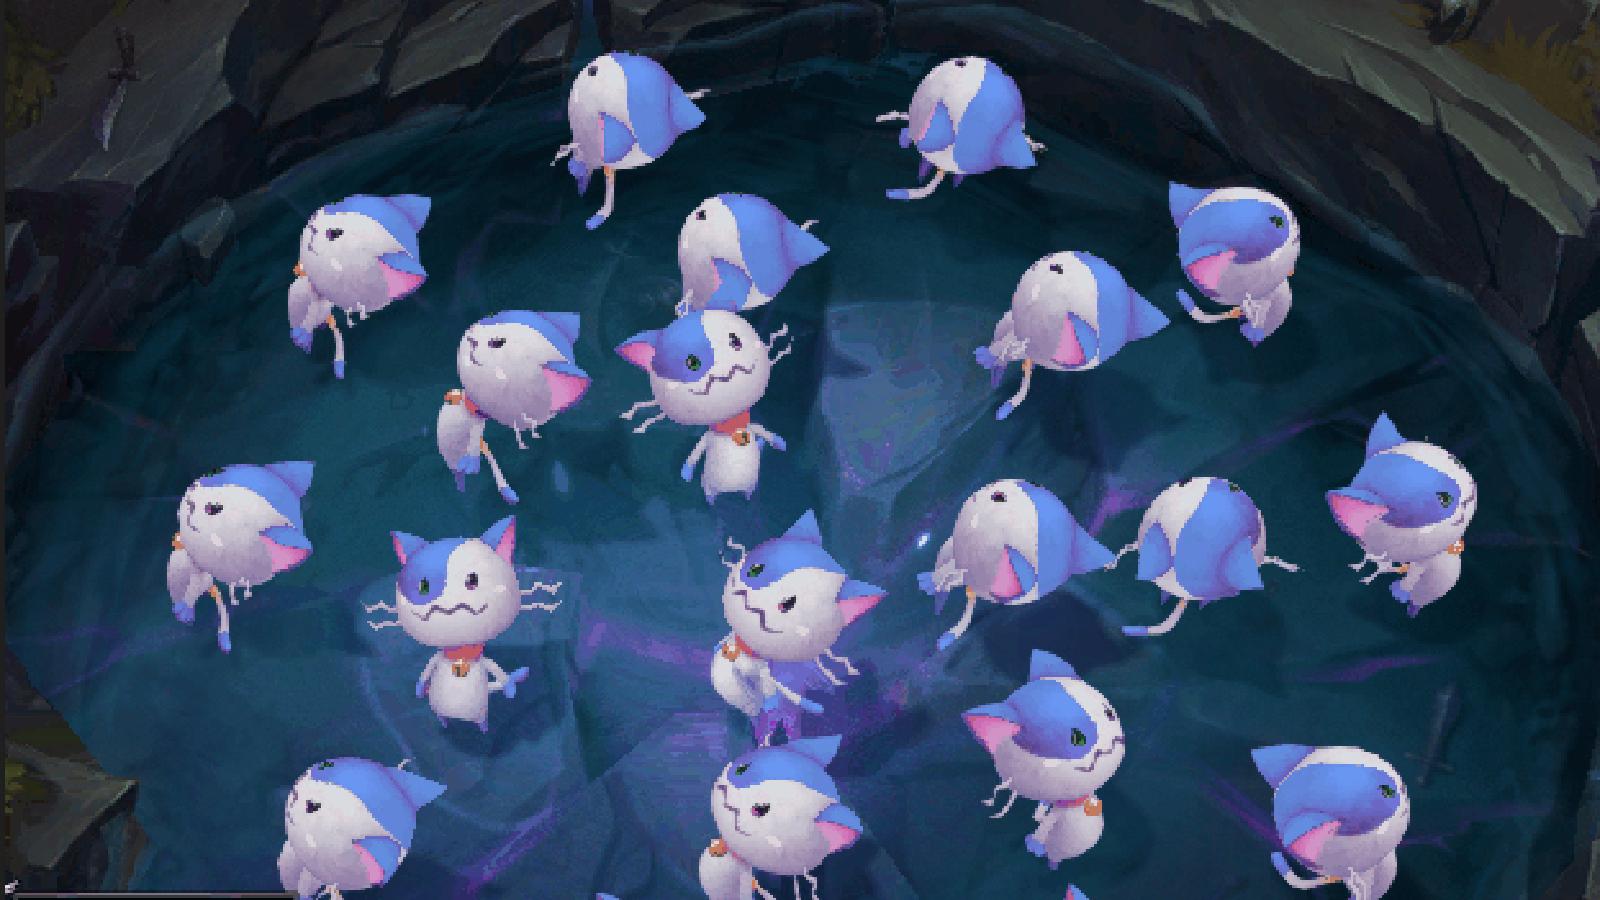 League of Legends newest jungle camp was almost a cult of cats